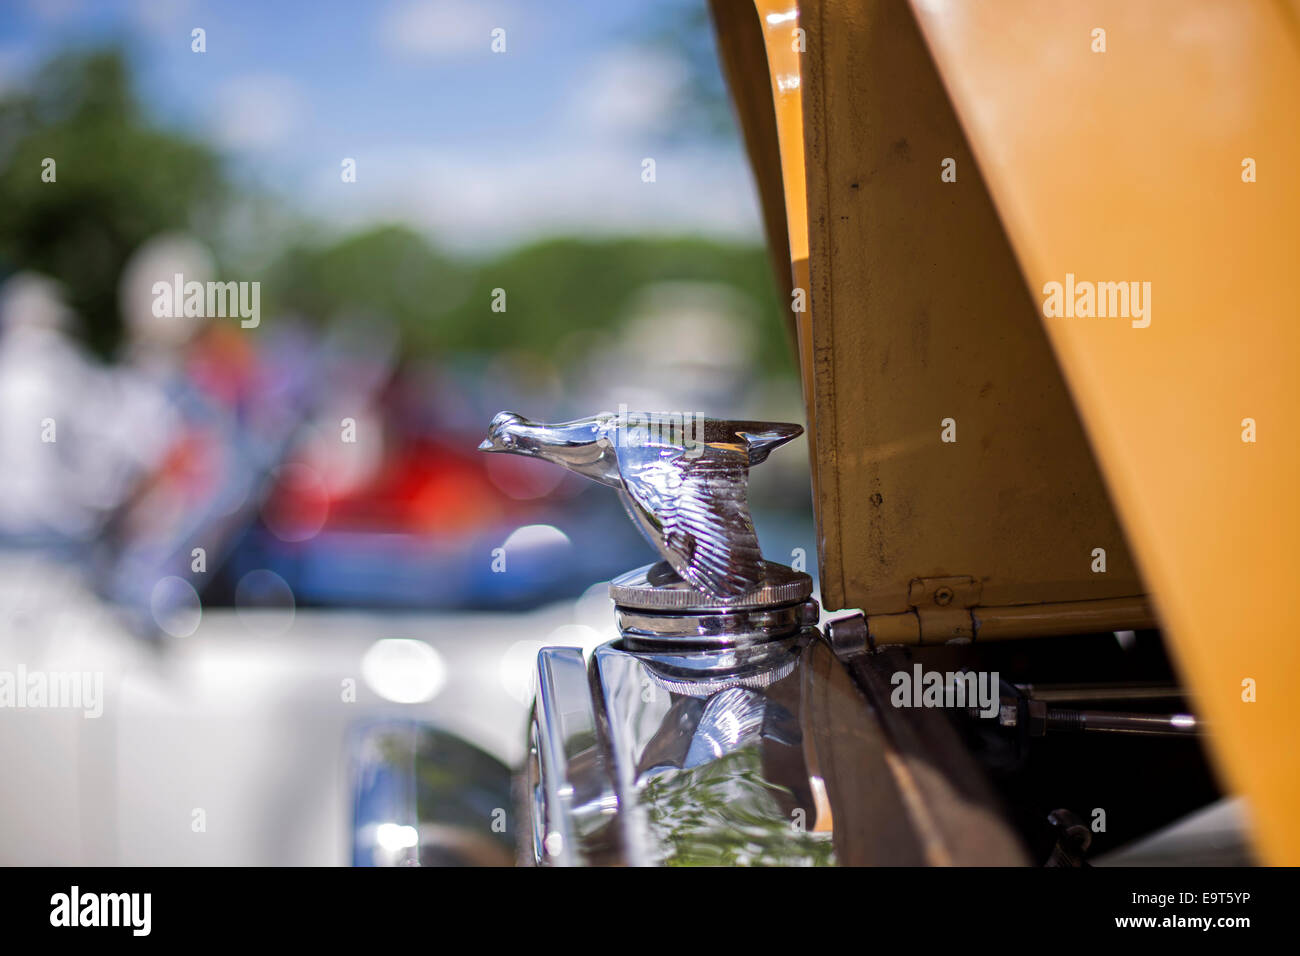 Hood ornament 1930 ford car hi-res stock photography and images - Alamy